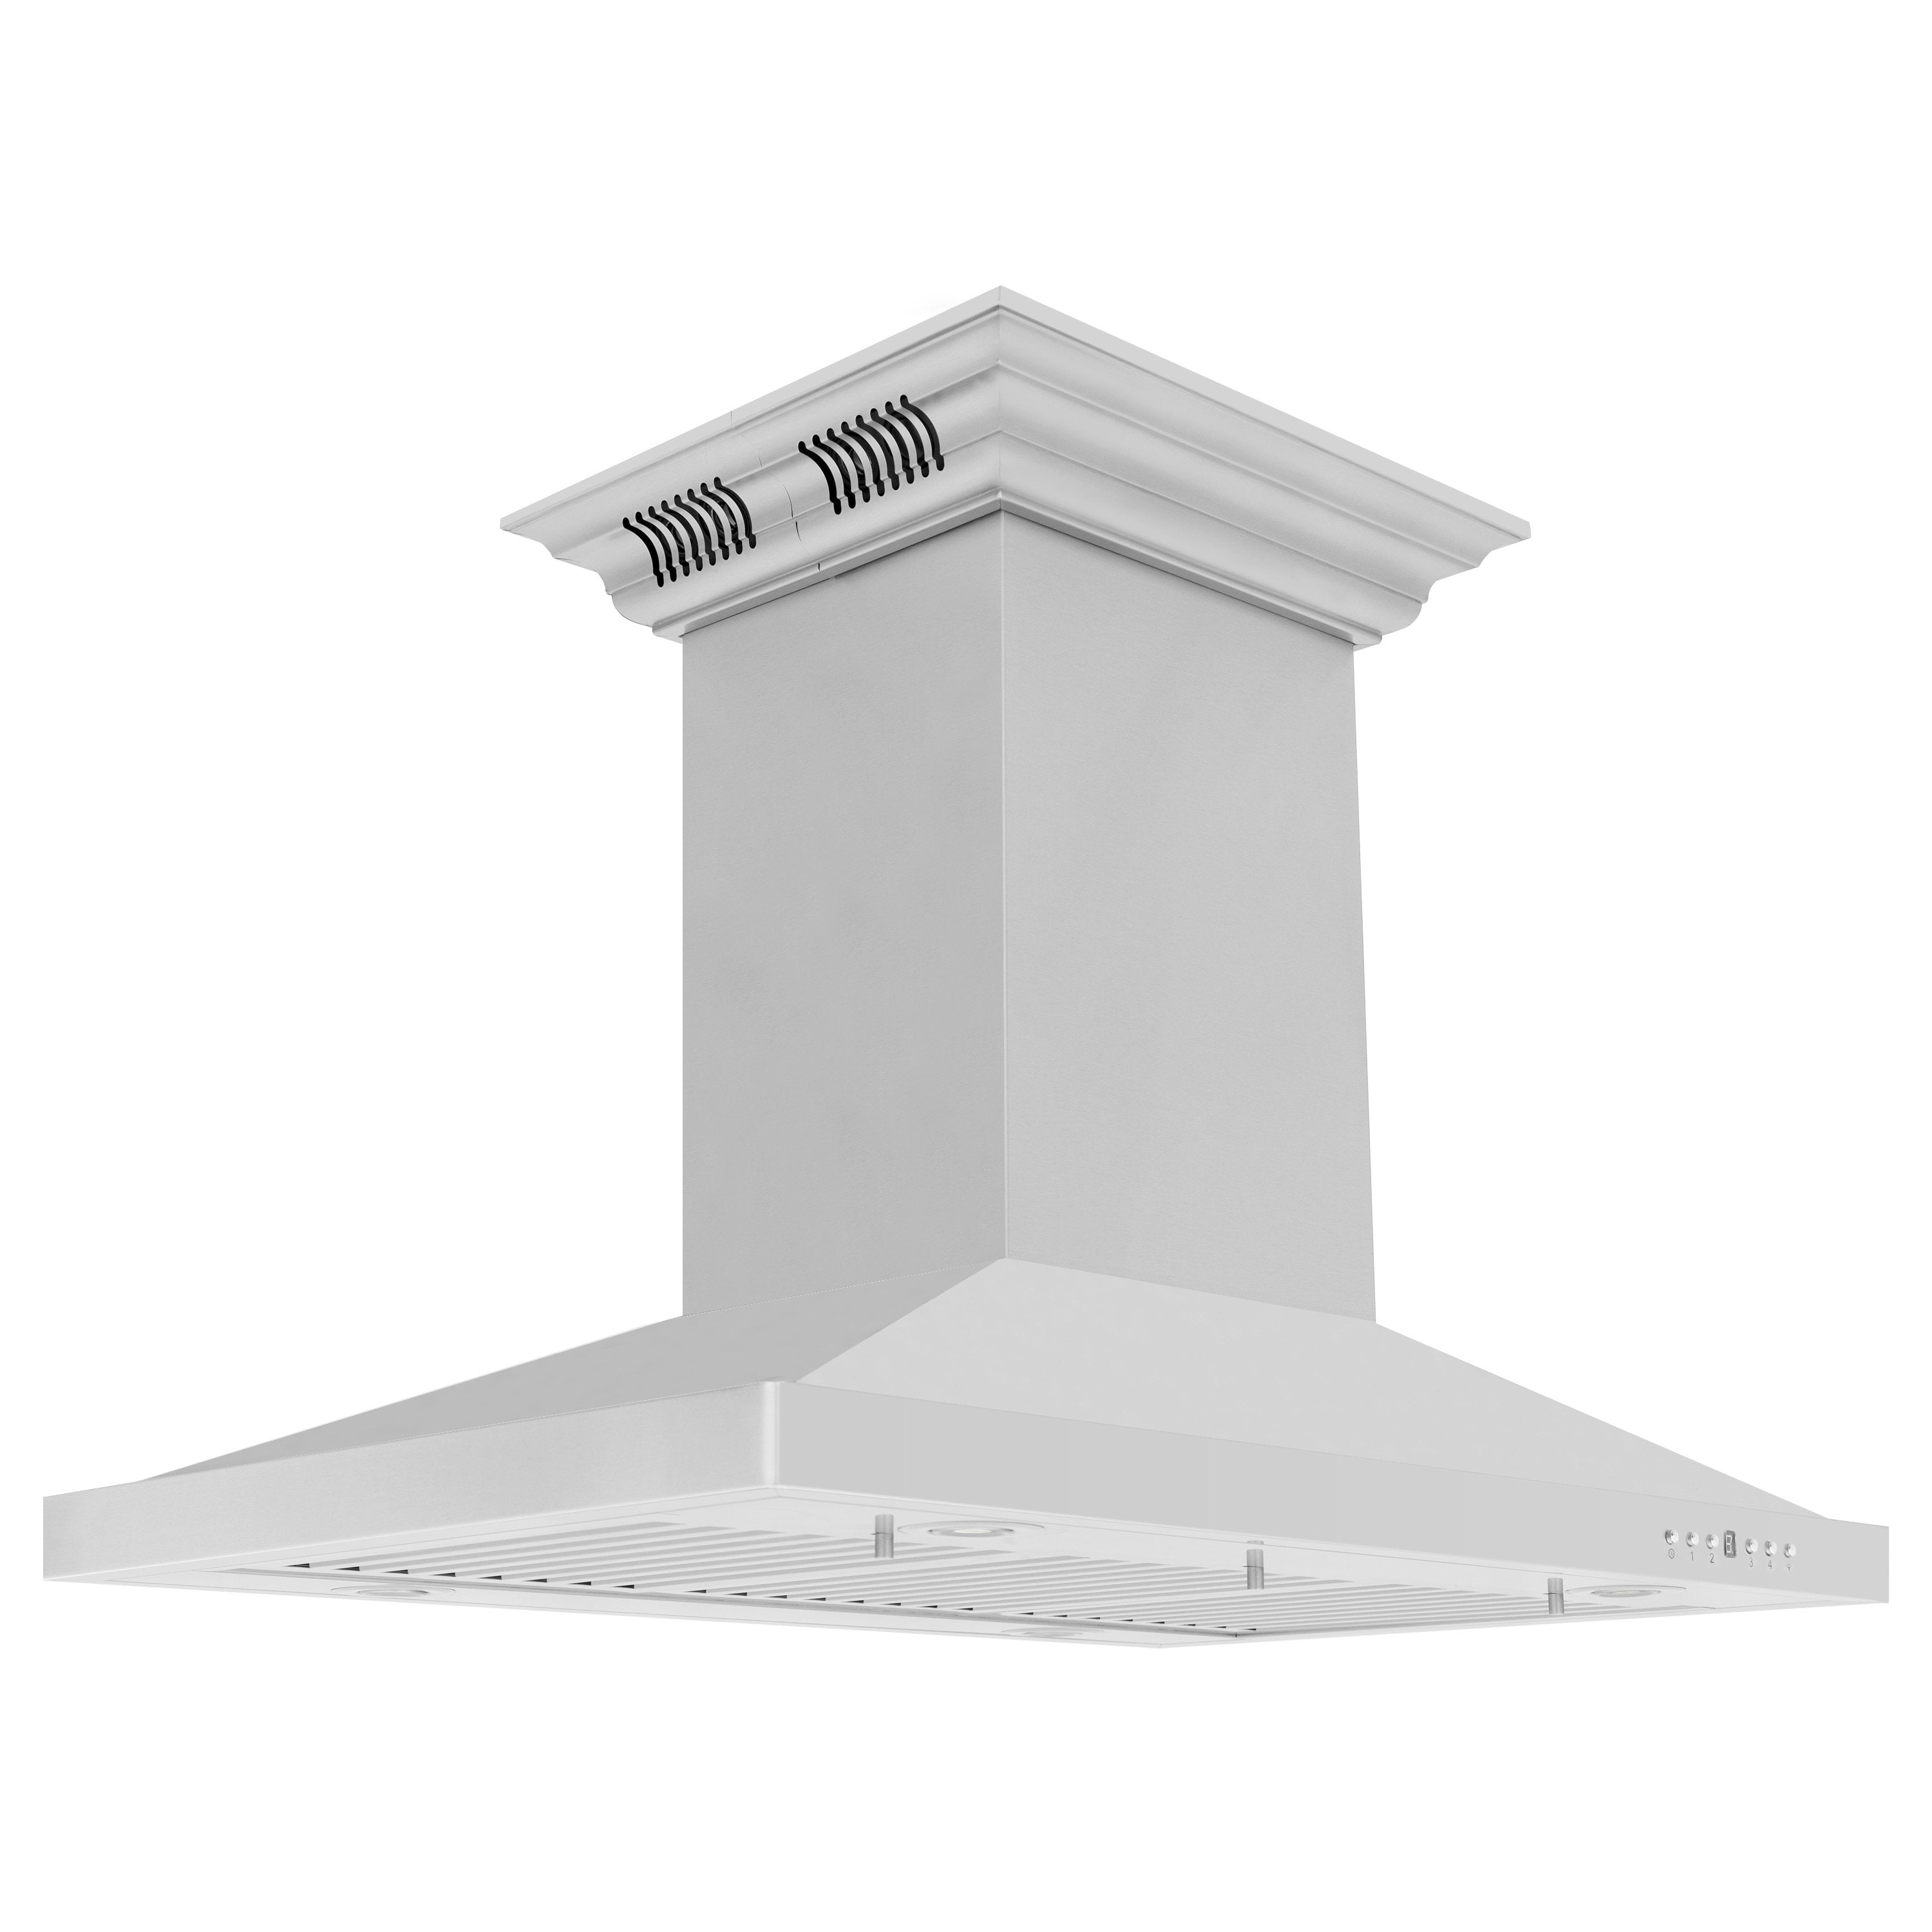 48" ZLINE CrownSound‚ Ducted Vent Island Mount Range Hood in Stainless Steel with Built-in Bluetooth Speakers (GL2iCRN-BT-48)